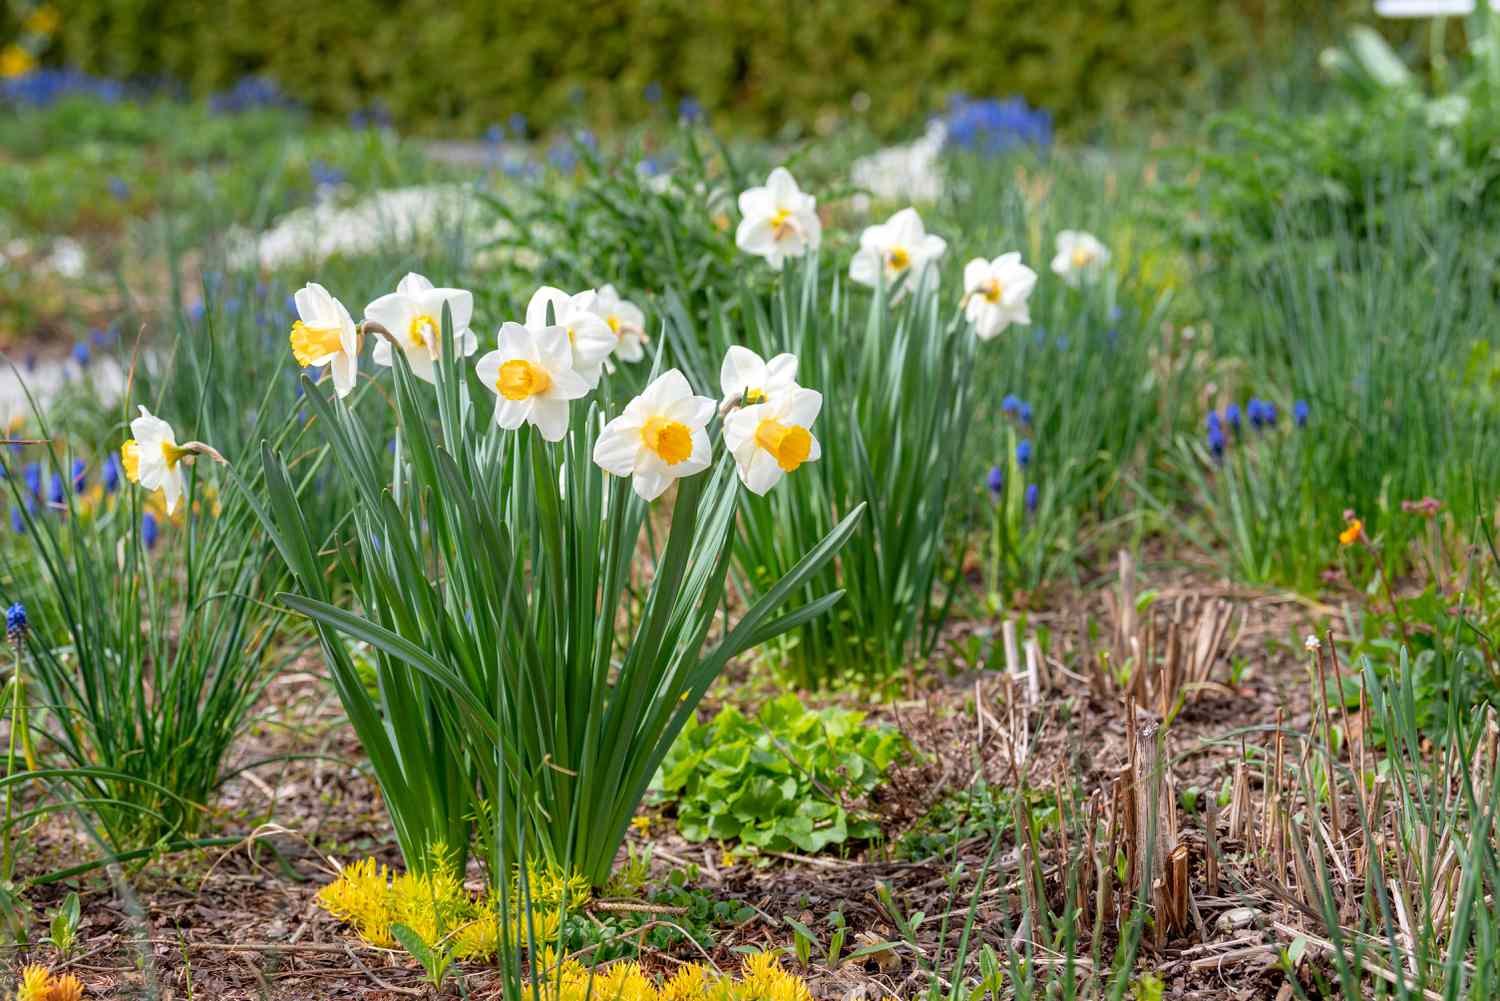 White daffodil flowers with white and yellow petals growing in garden